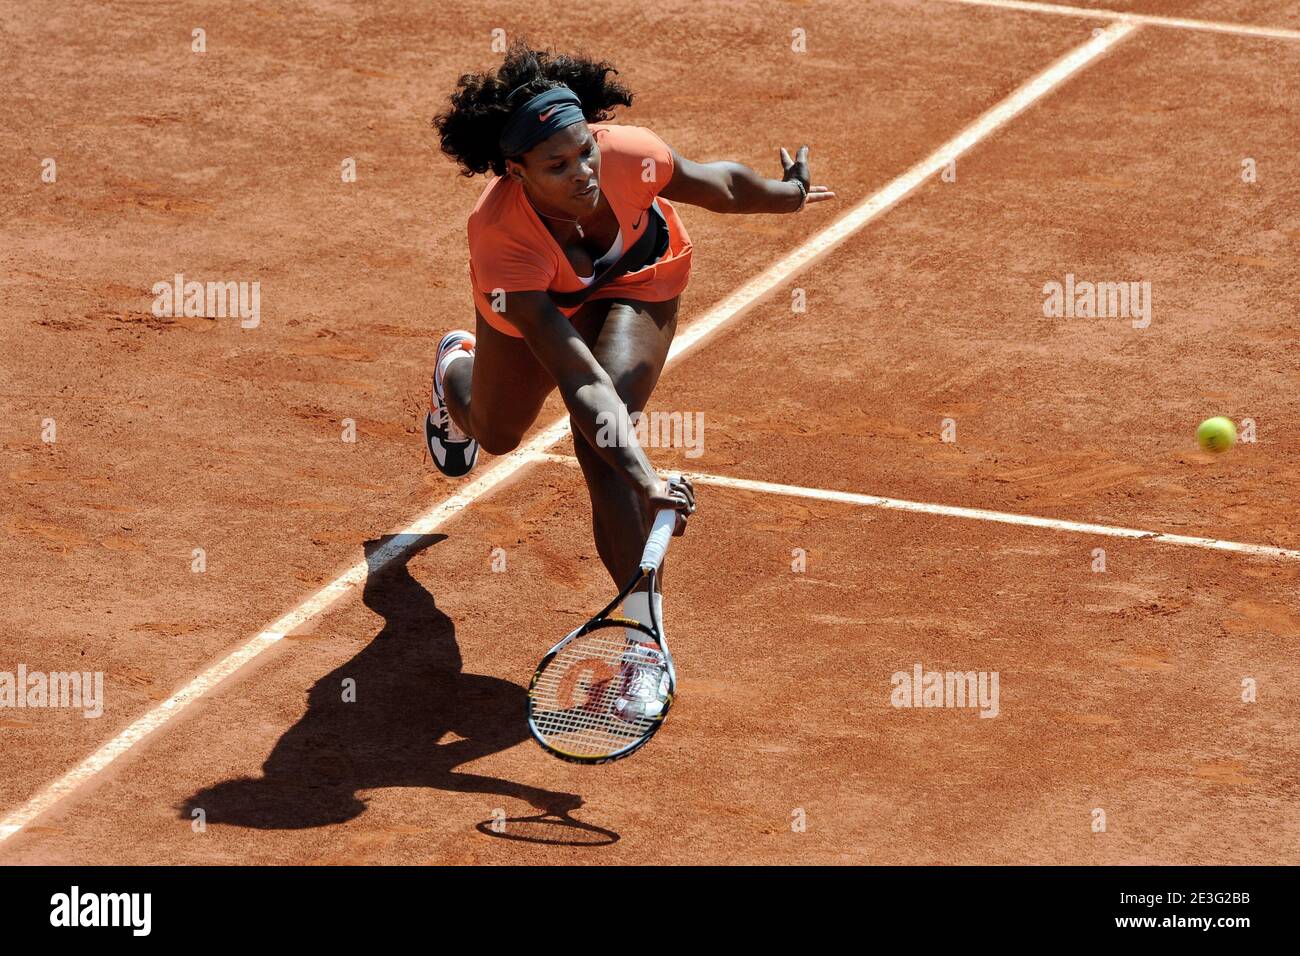 USA's Serena Williams defeats, 6-1, 6-2, Canada's Aleksandra Wozniak in their Fourth round of the of the French Open tennis at the Roland Garros stadium in Paris, France on June 1, 2009. Photo by Henri Szwarc/ABACAPRESS.COM Stock Photo